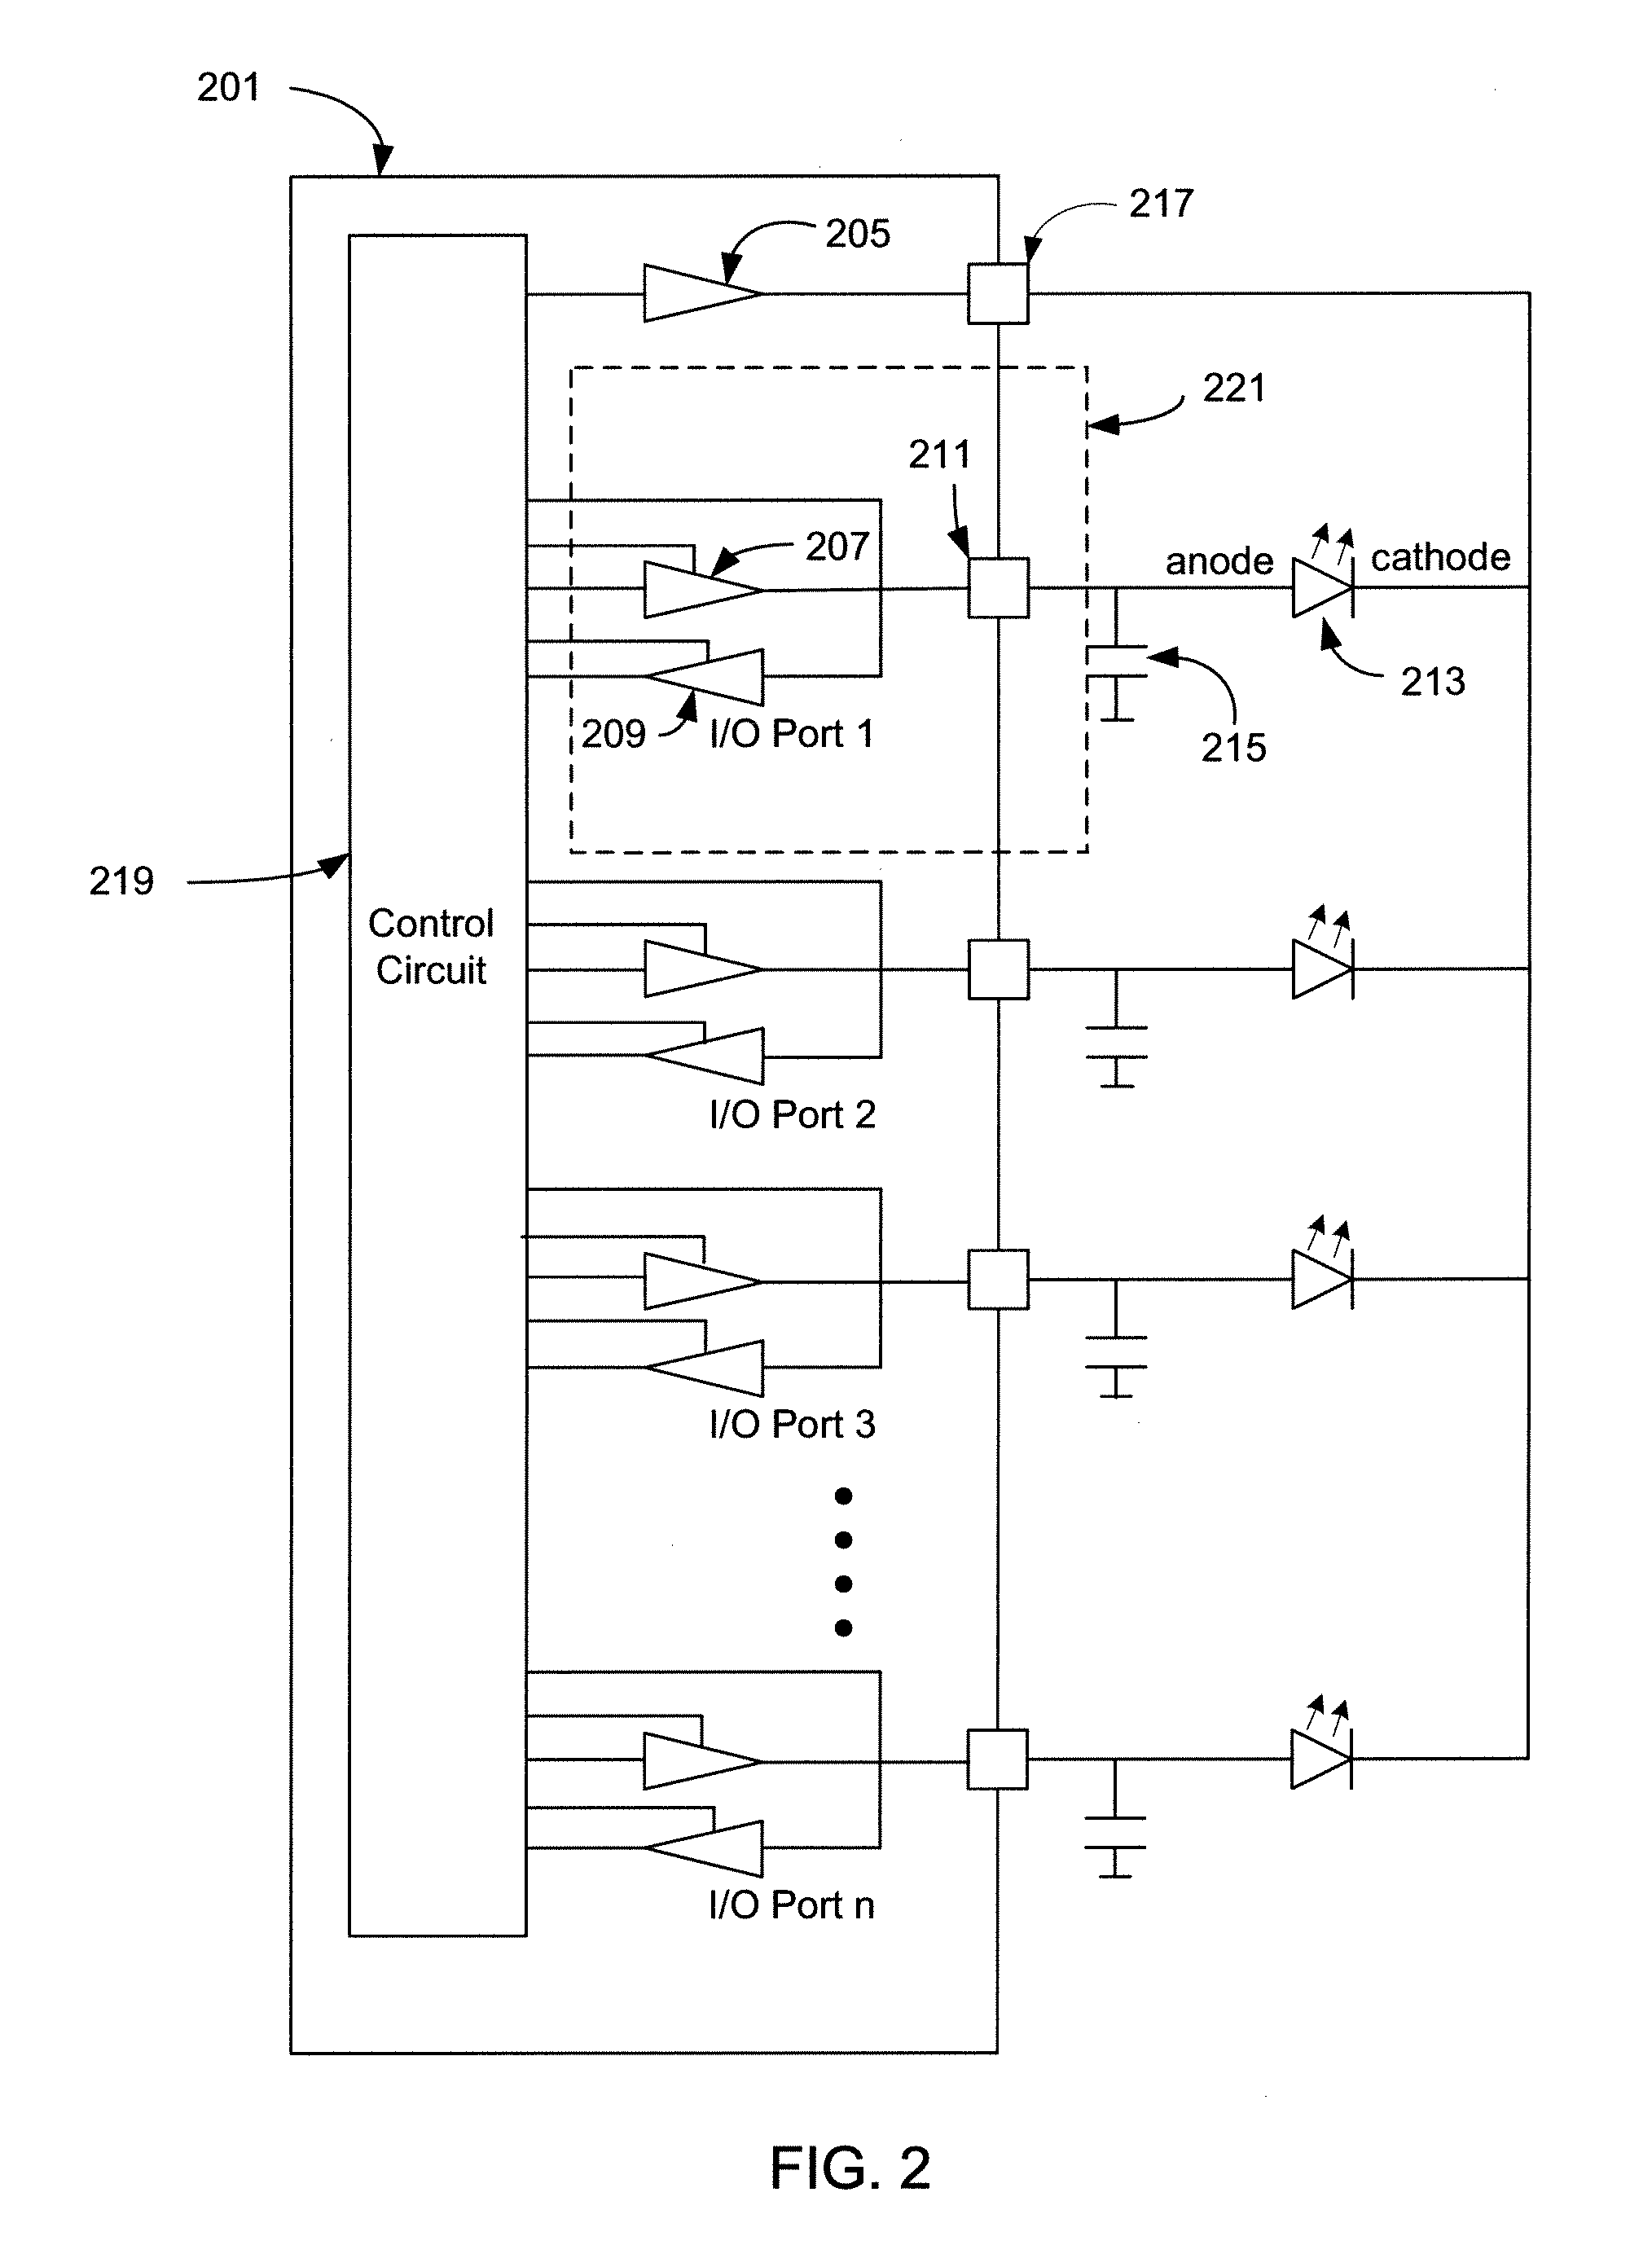 Multiple capacitive (button) sensor with reduced pinout